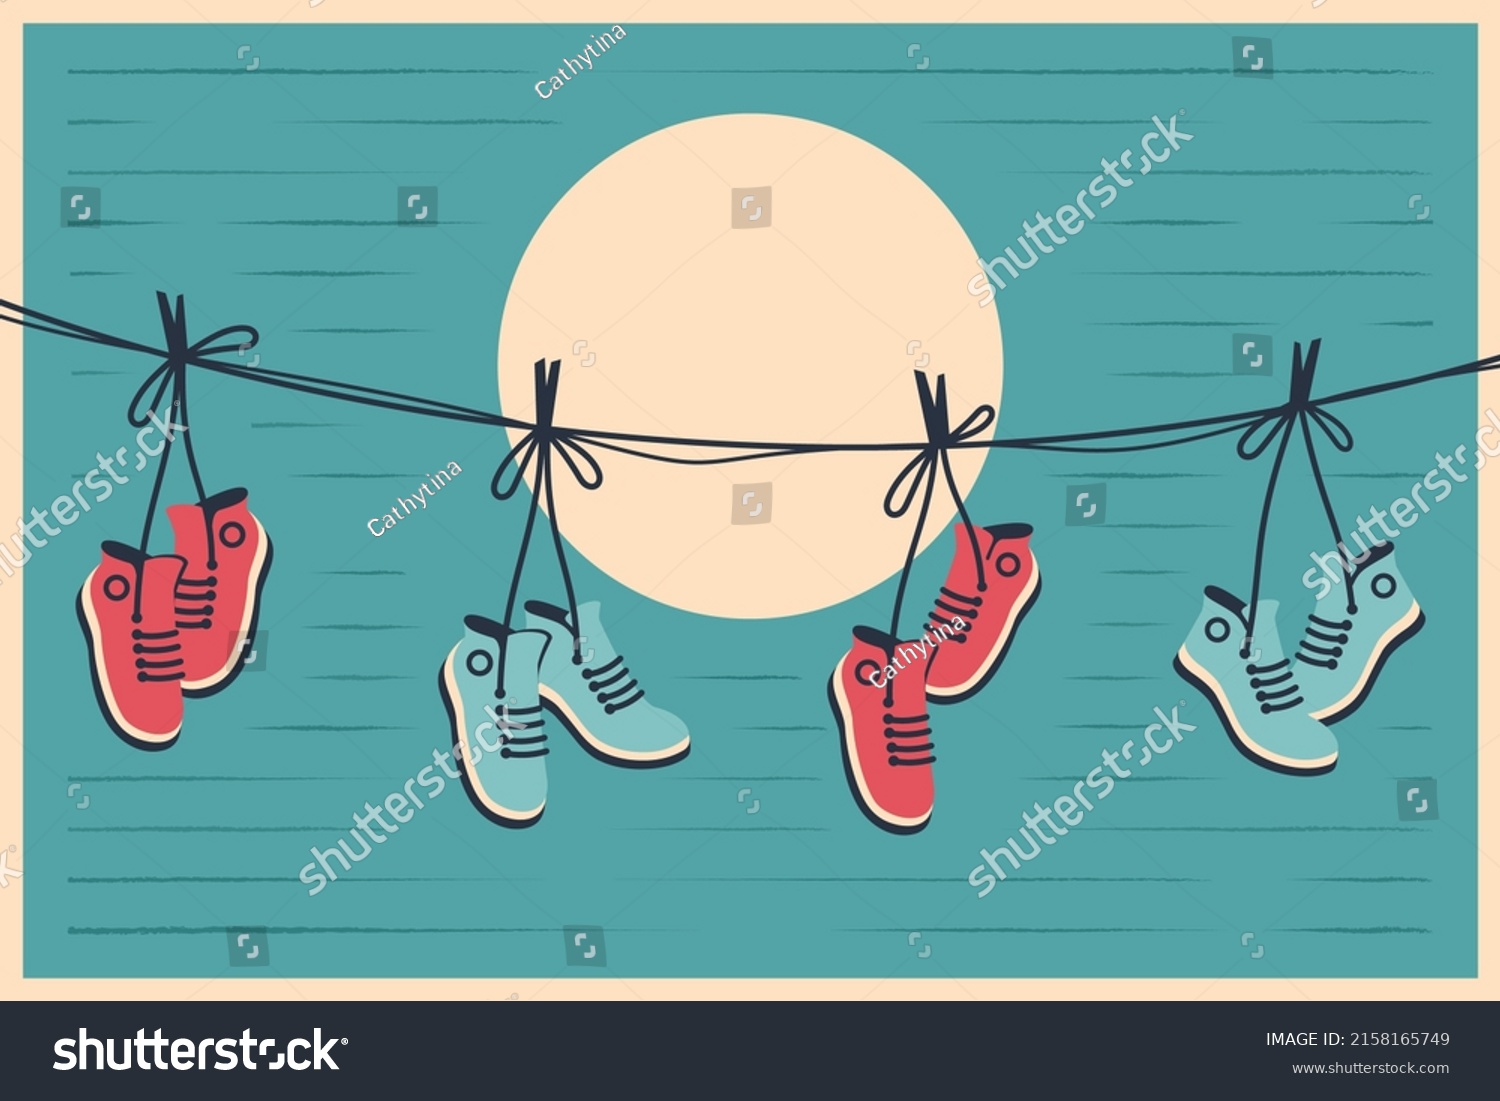 SVG of Sneakers hanging in retro style. Pair of shoes with tied laces dangling on a string. Vector flat illustration for banner, poster, cover art svg